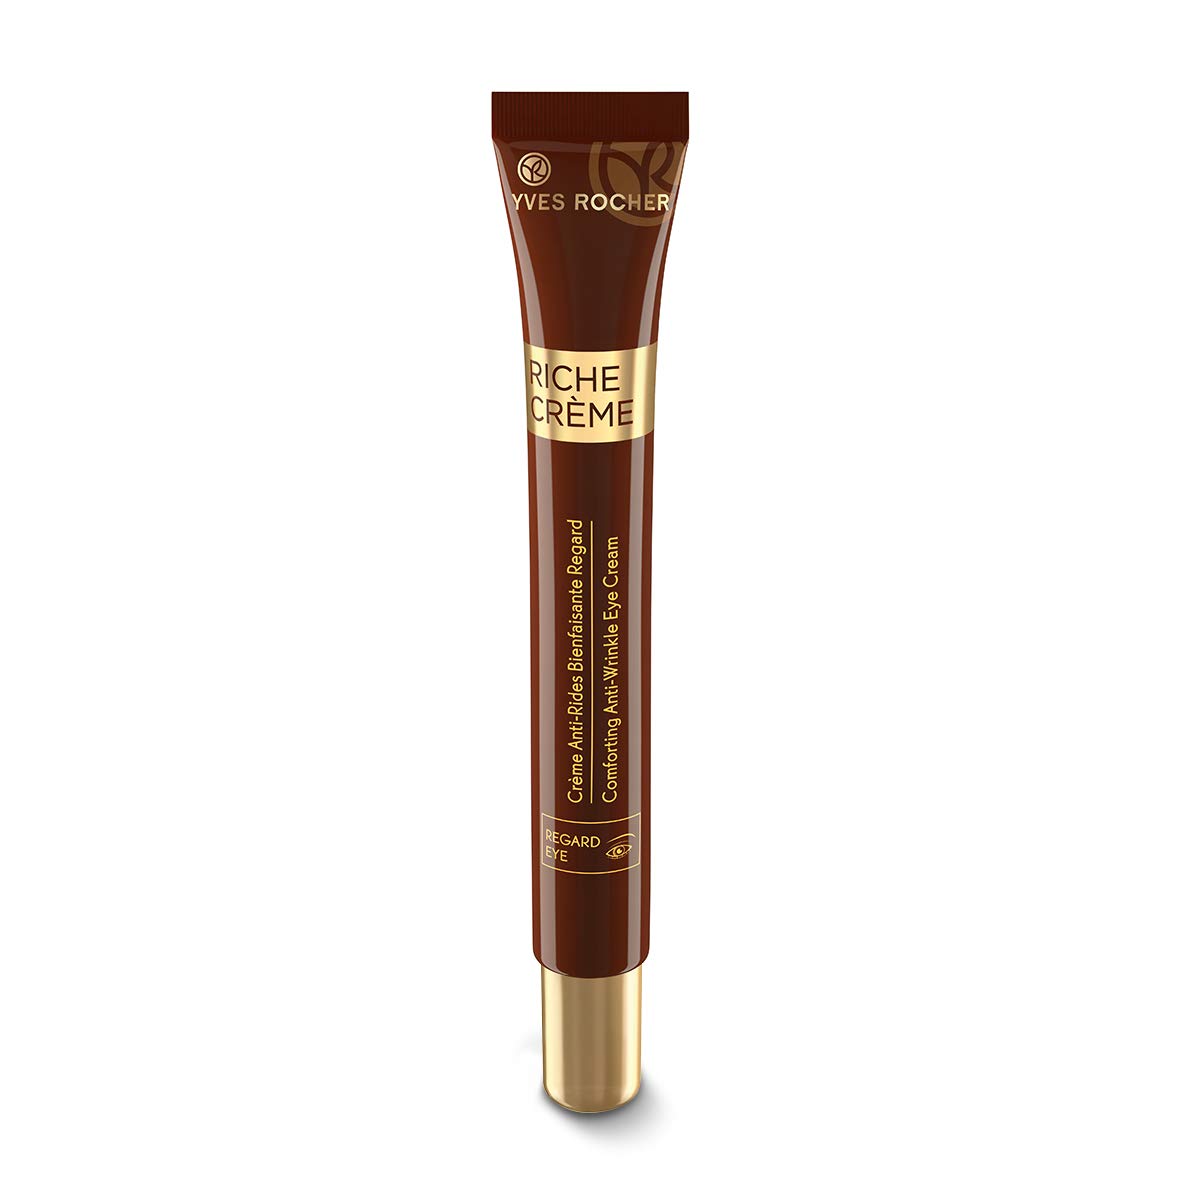 Yves Rocher Eye Cream Riche Crème Comforting Anti-wrinkle with precious oils, for Mature Skin + Dry skin, 14 ml tube